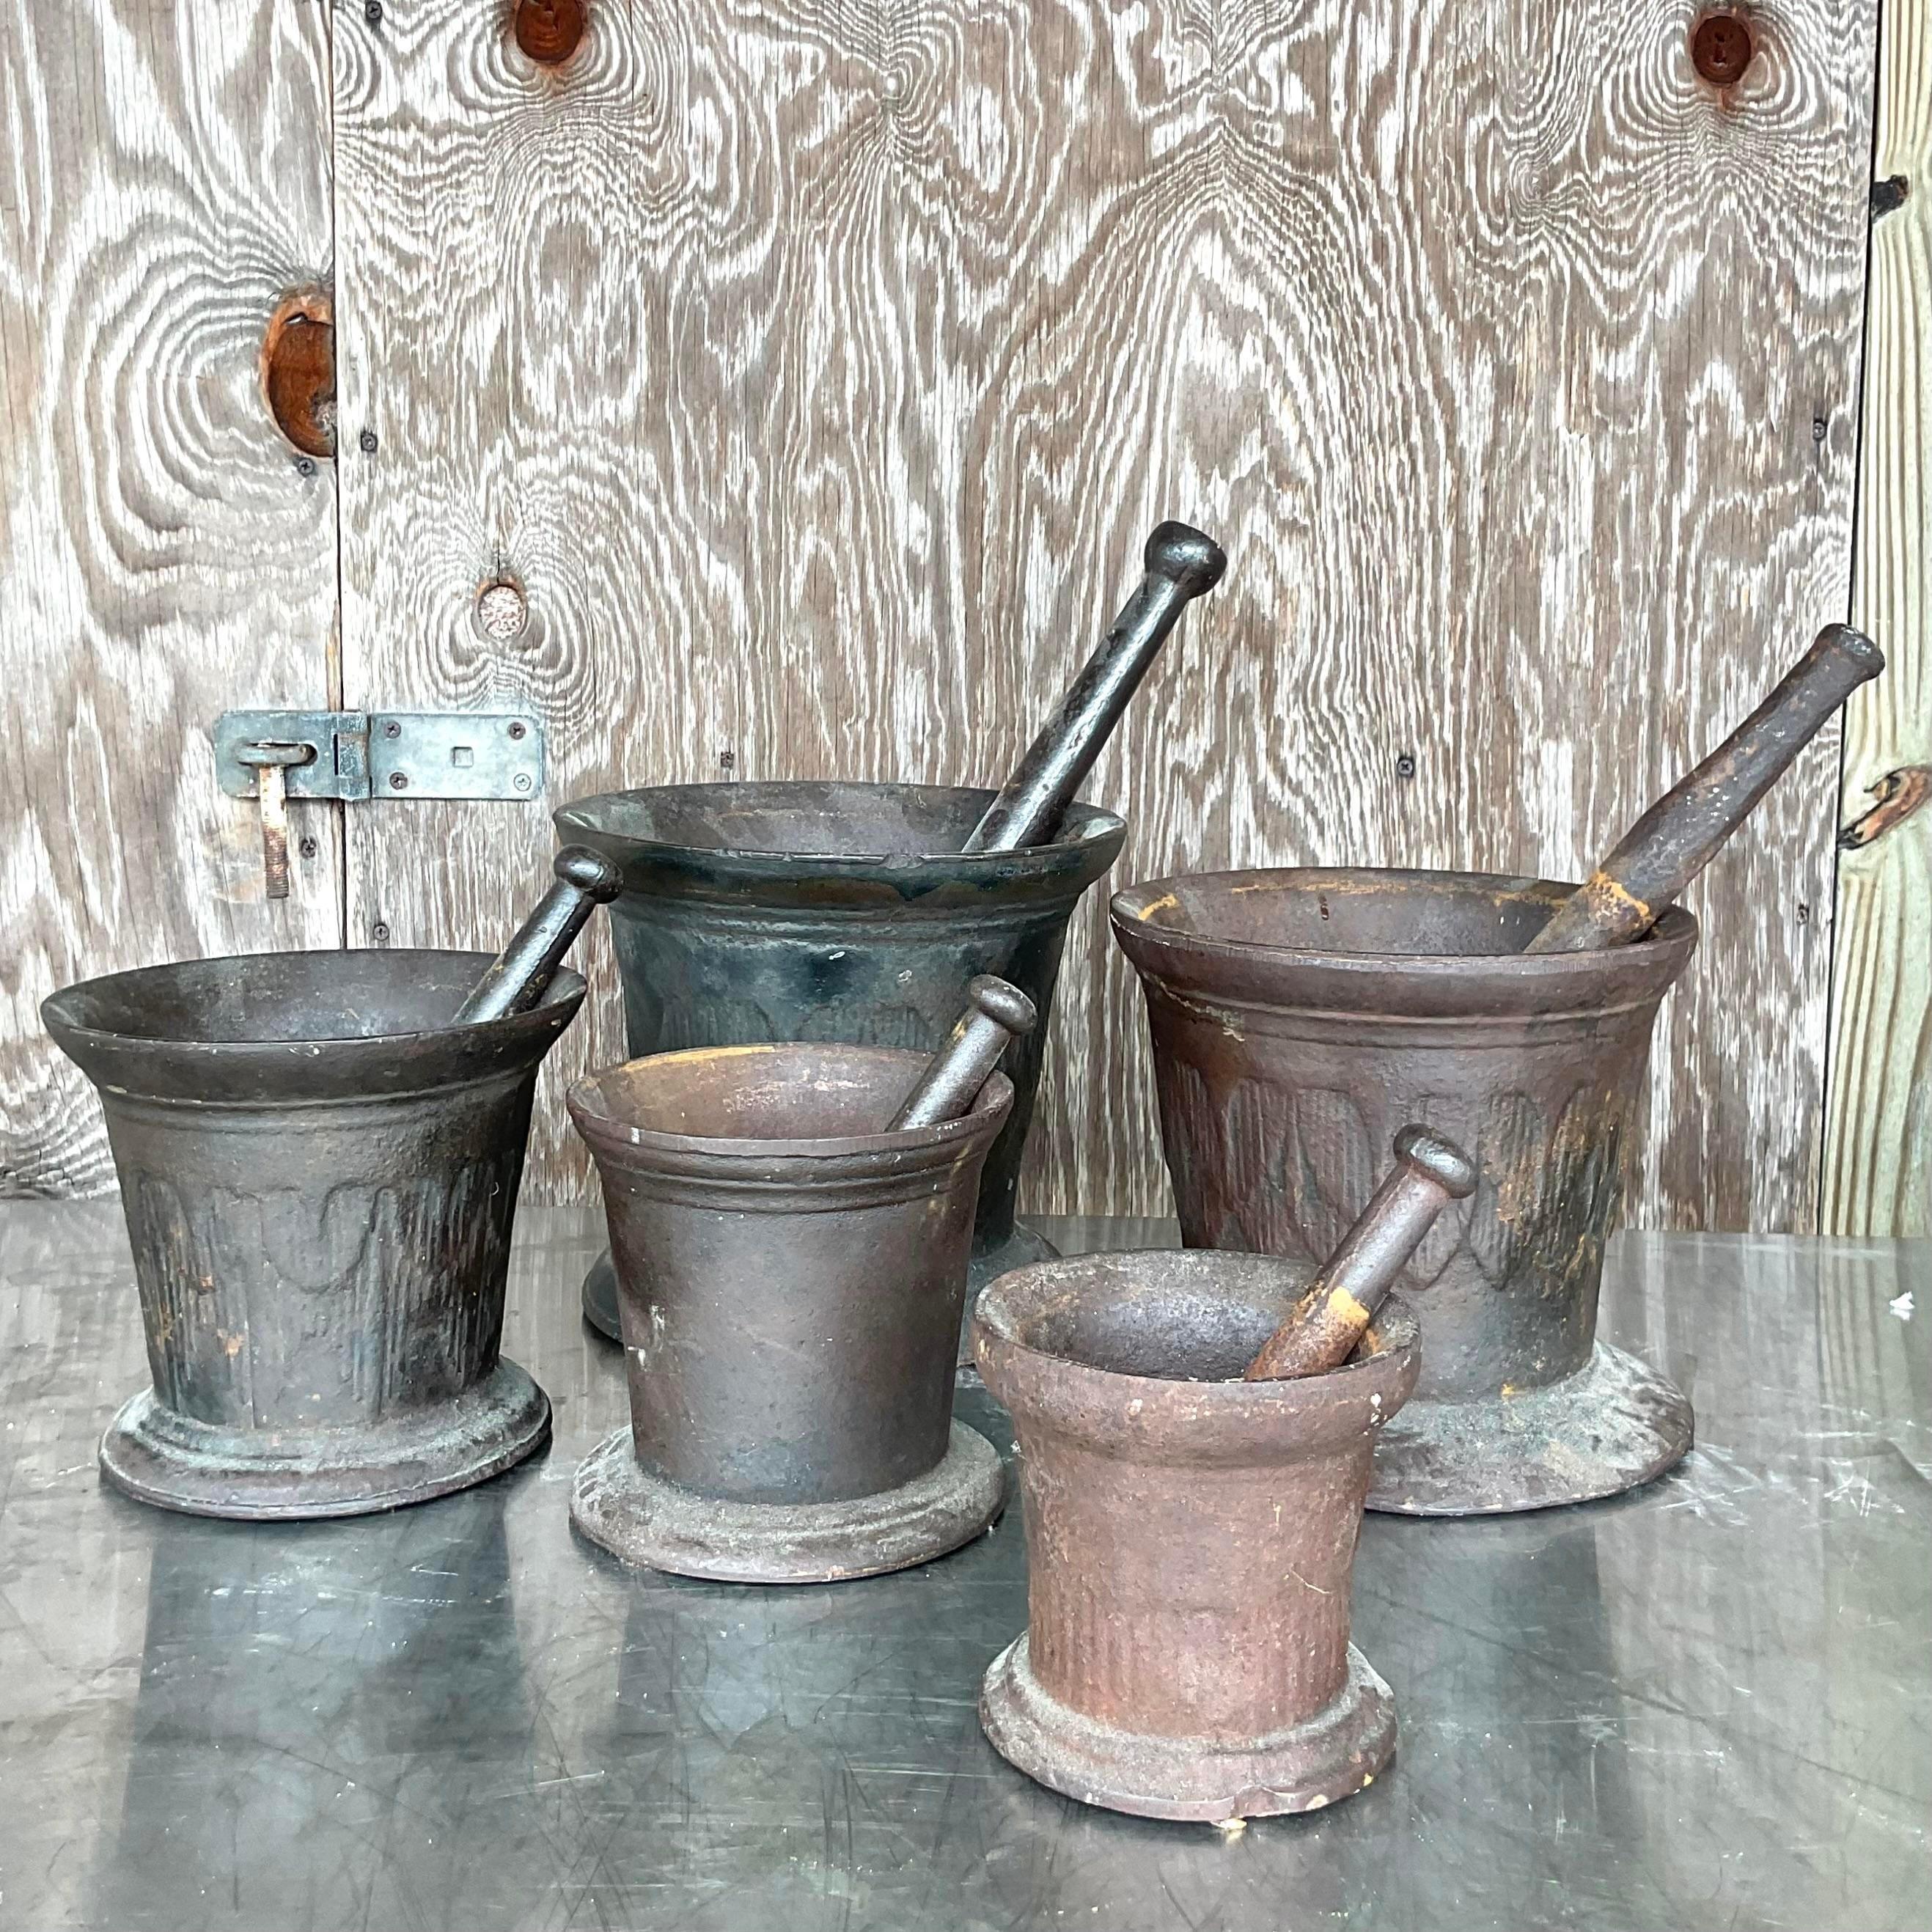 Incredible set of 5 Boho mortar and pestles. Beautiful wrought iron vessels from back it the days of your corner Apothecary. A range of sizes and designs. Acquired from a NYC estate.
Dimensions:
(Mortar and pestles have been labeled in last picture